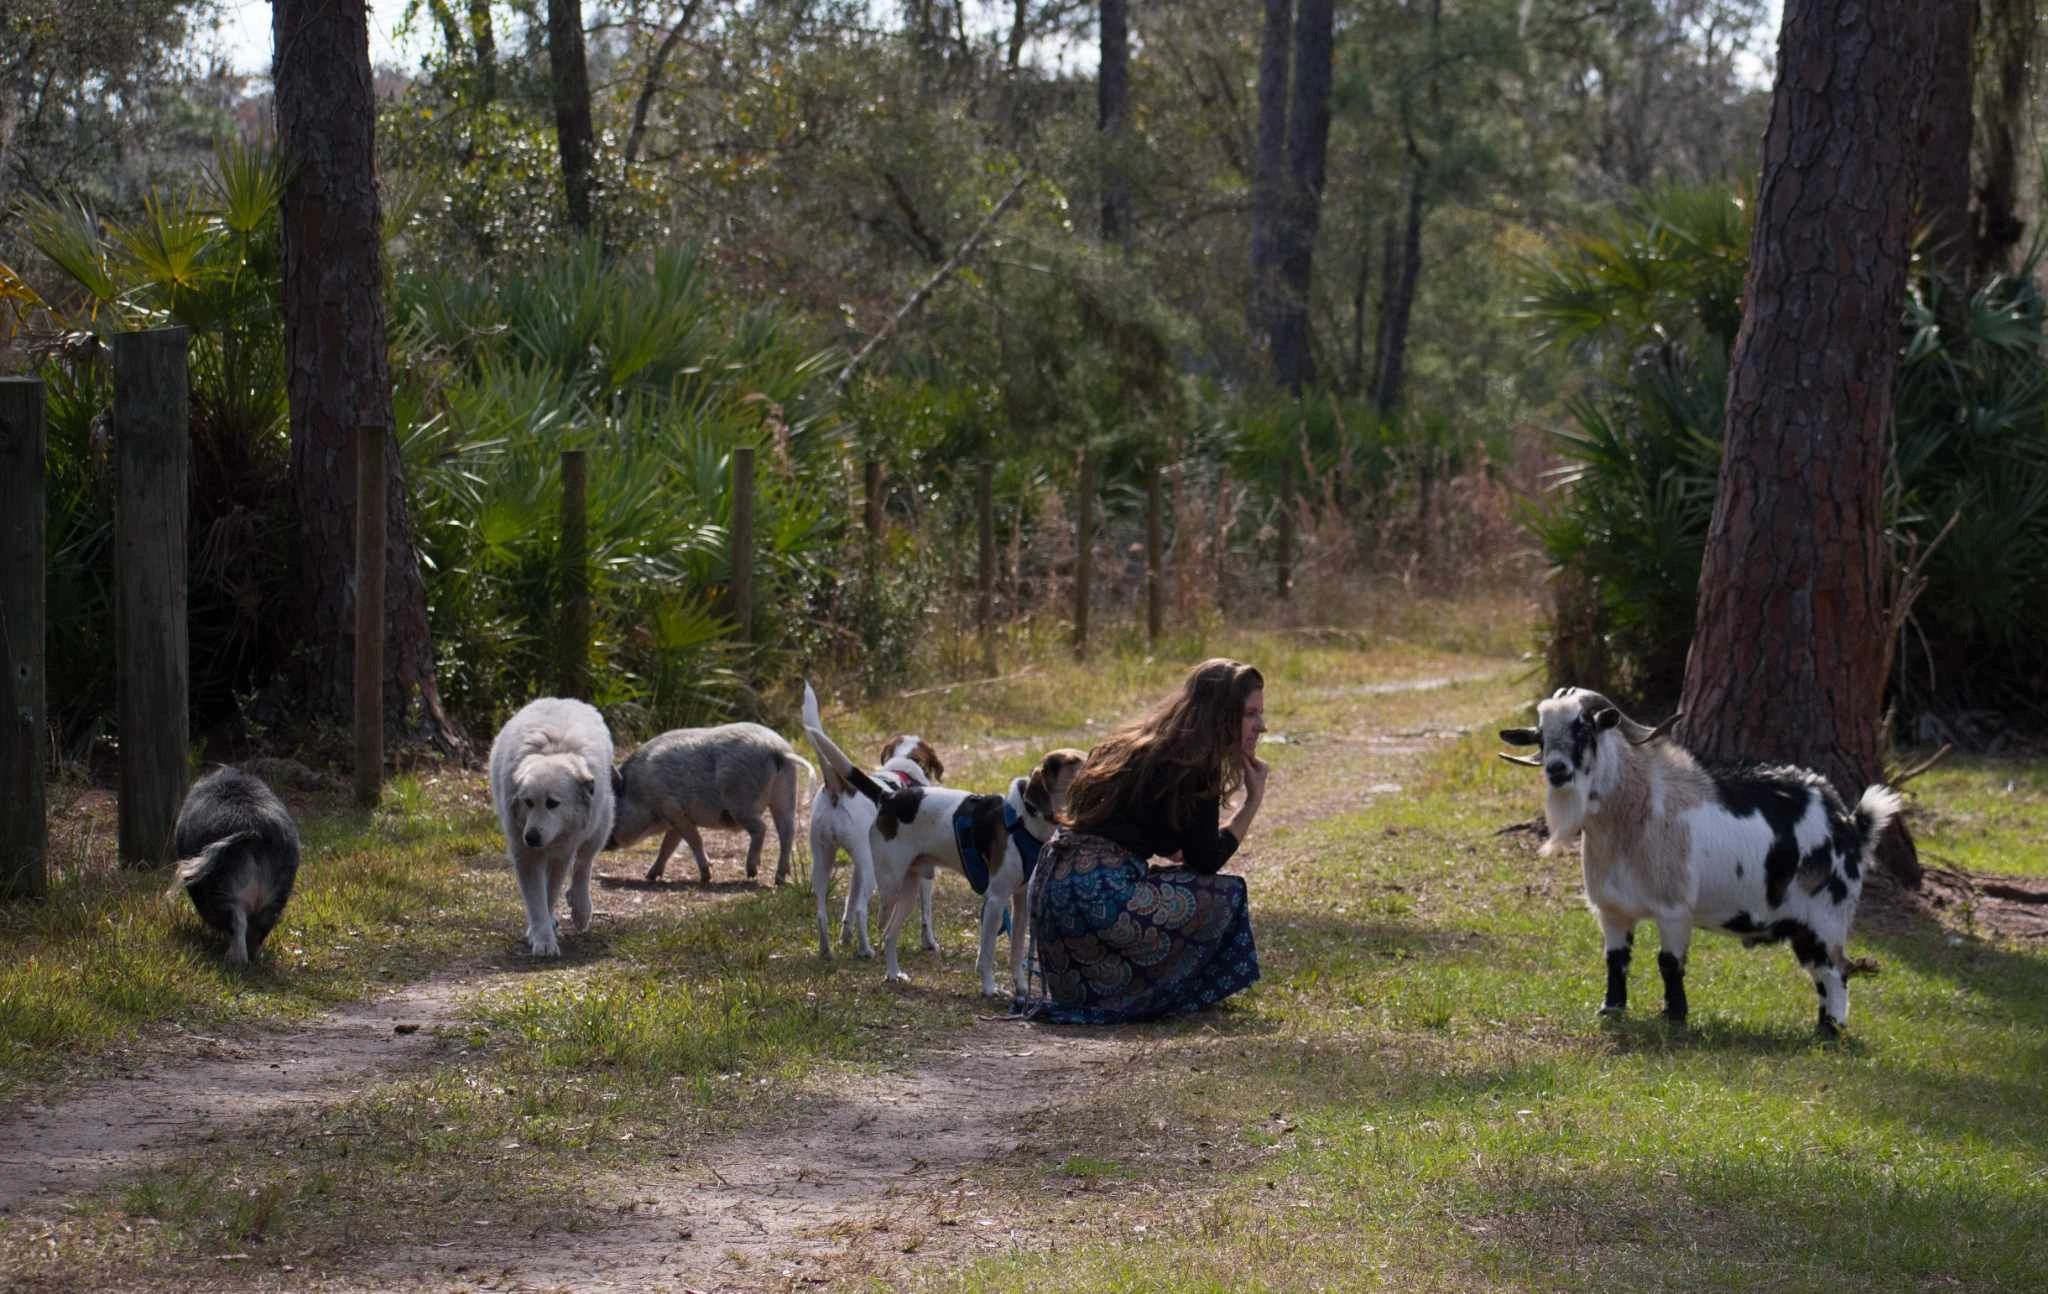 Long hair woman down in grass, tall pine lined driveway facing a goat. 2 pigs and 3 dogs behind her 